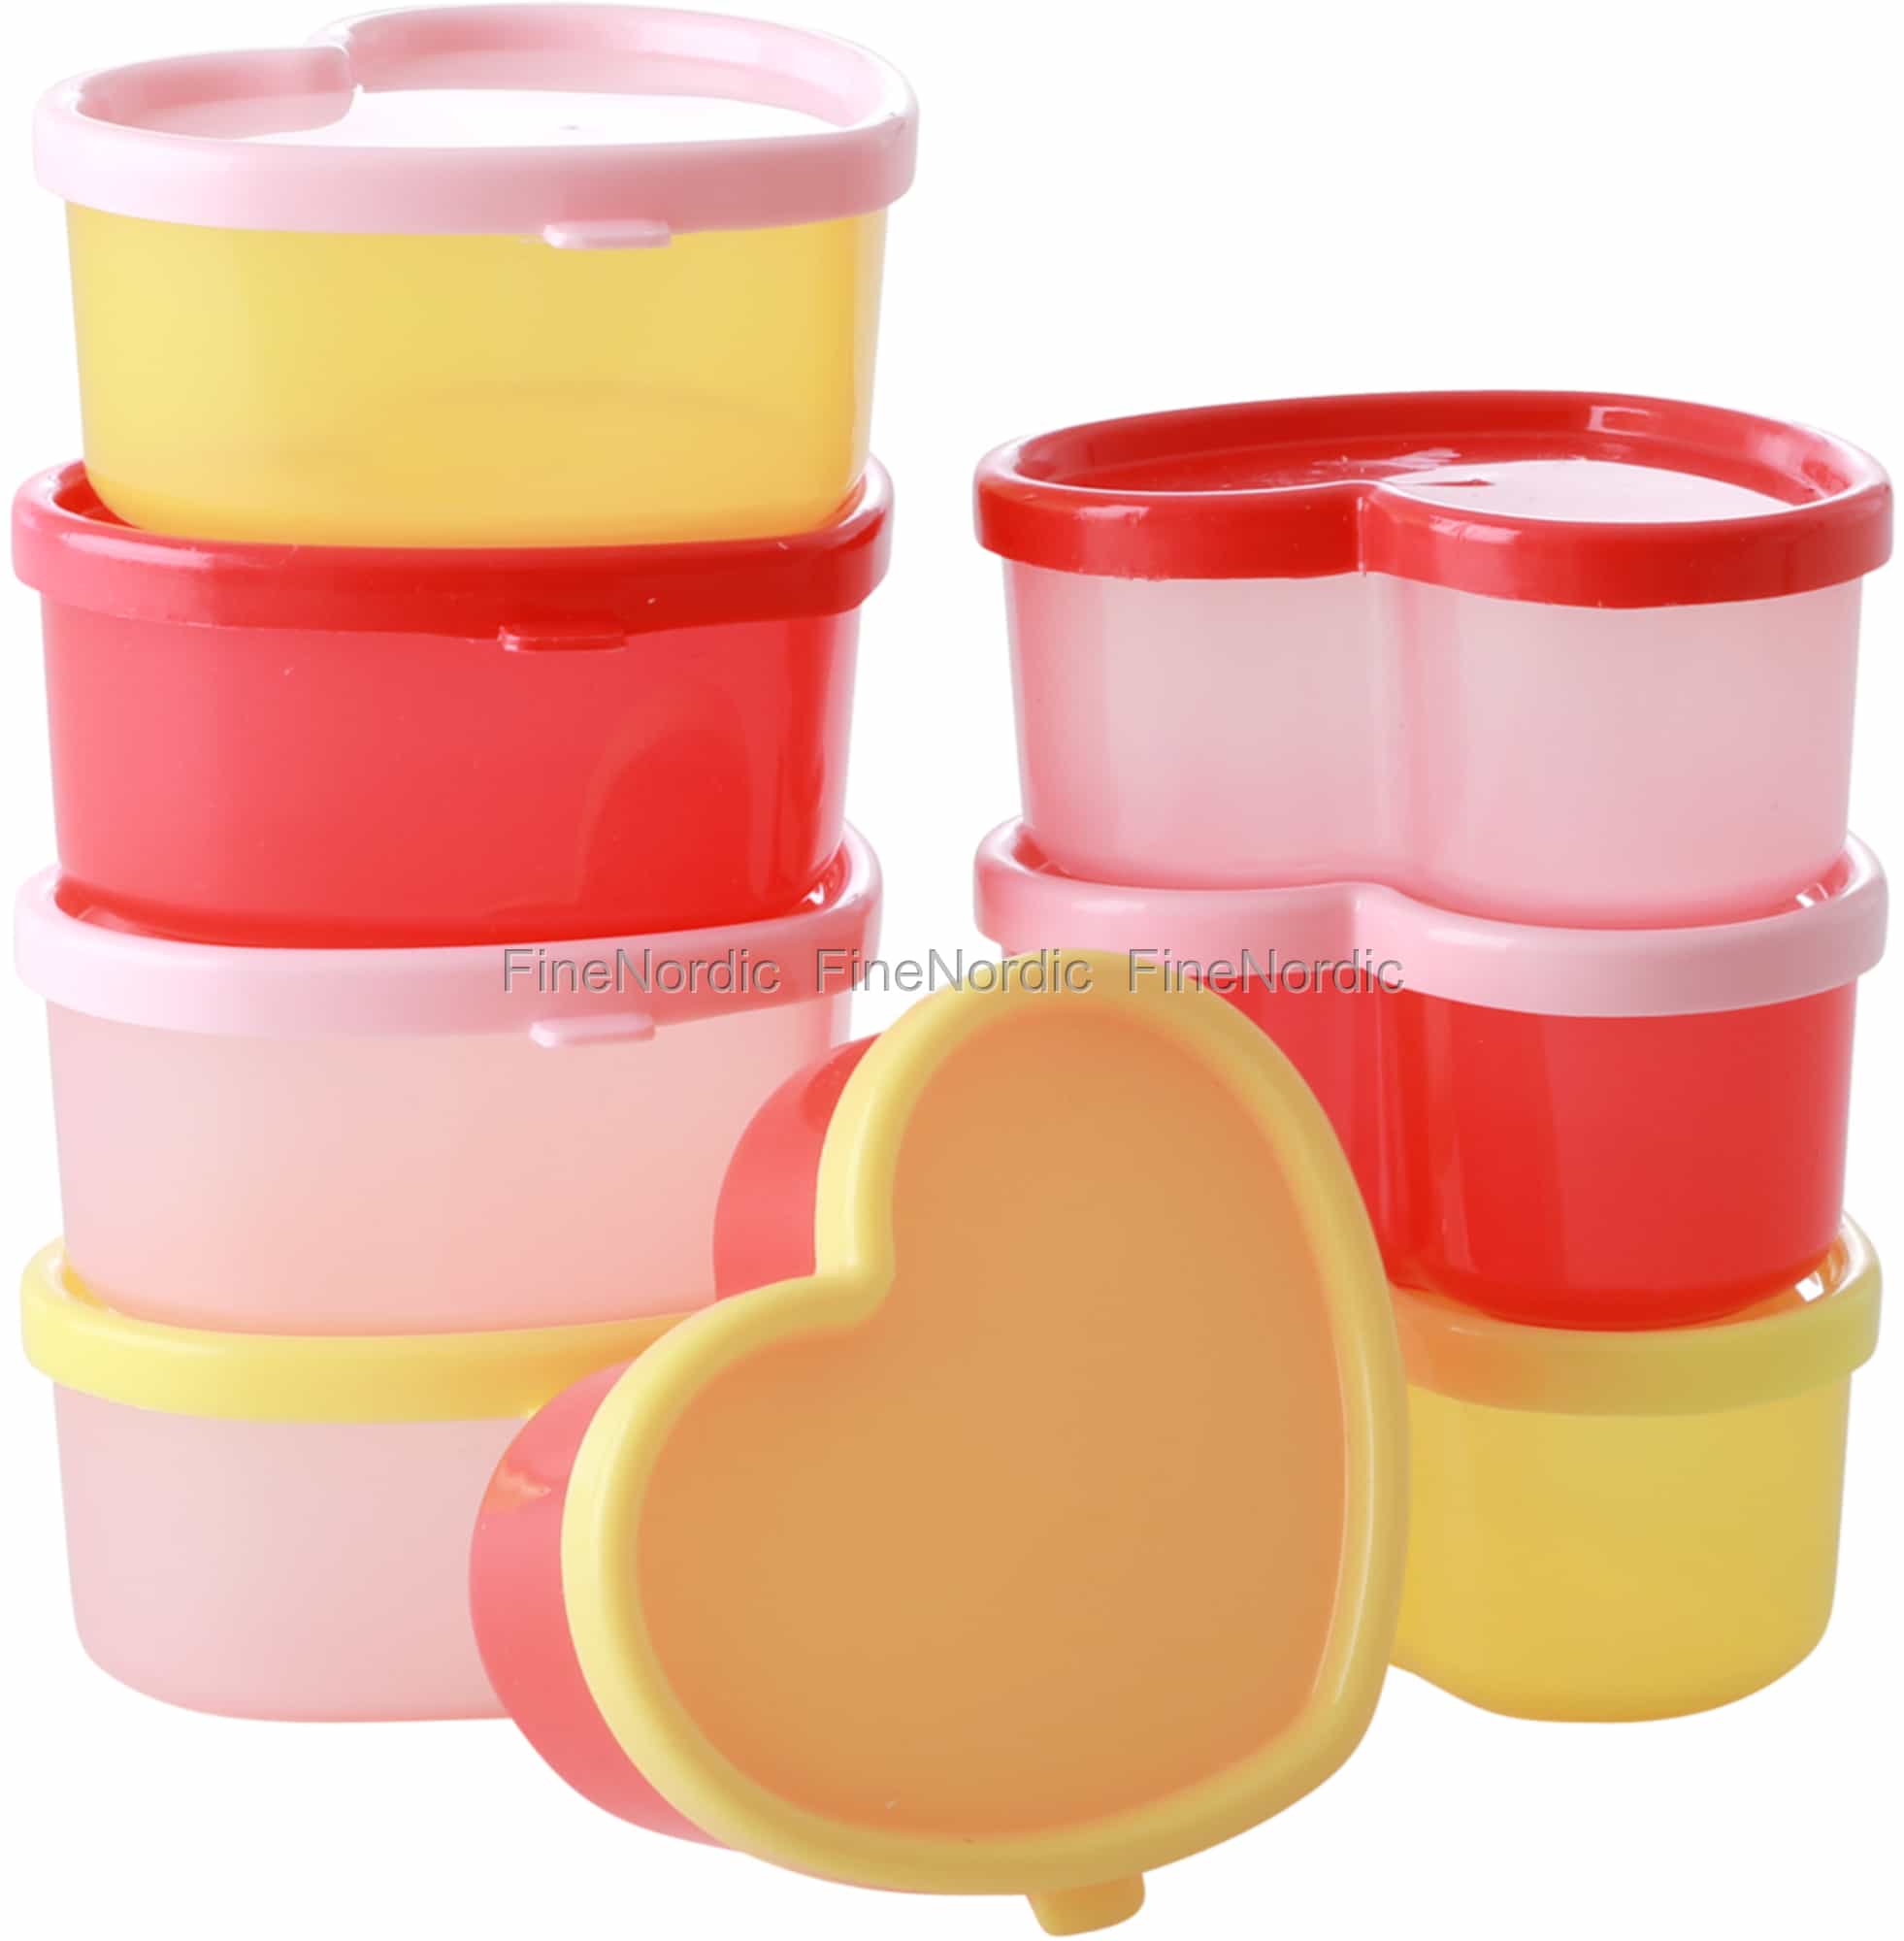 https://images.finenordic.com/image/53540-large-1597317954/rice-plastic-food-keepers-heart-shape-3-mixed-colors-small-8-pcs-in-a-net.jpg